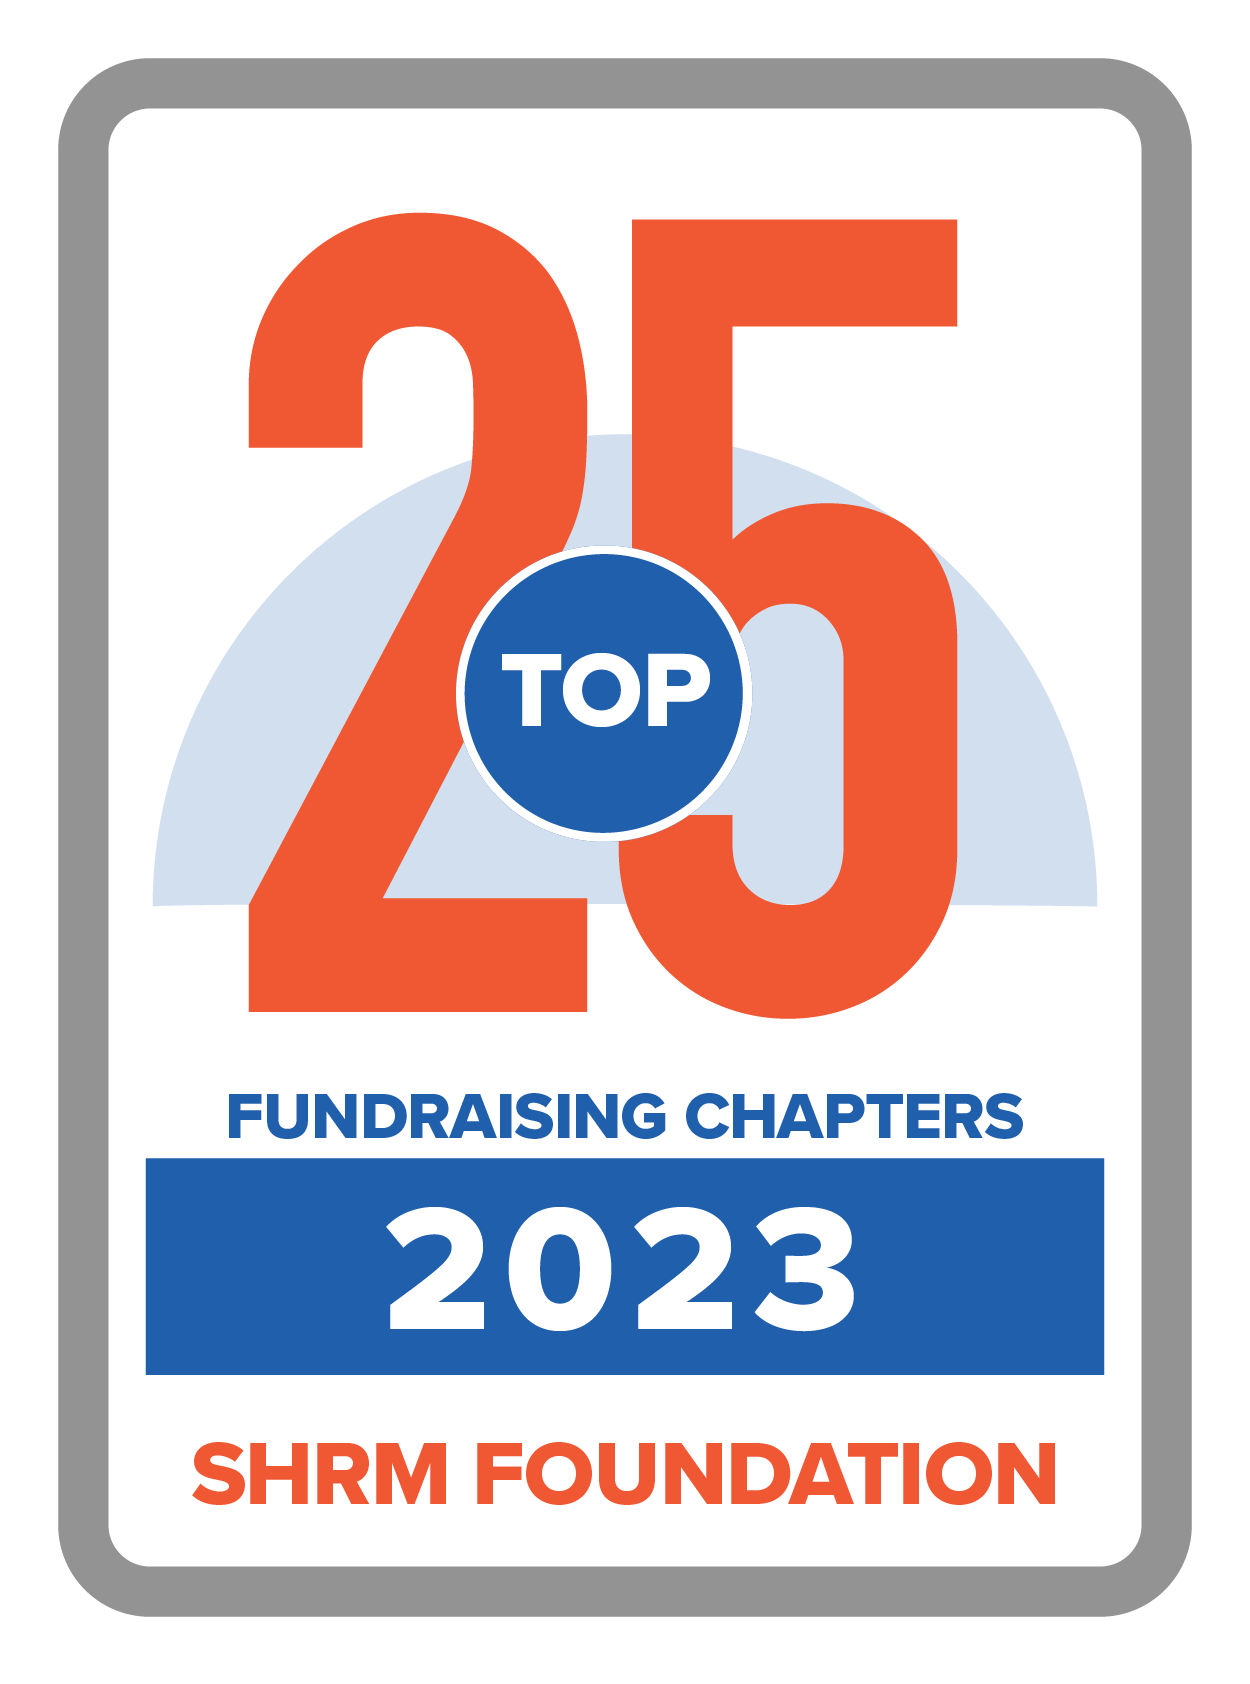 Top 25 Fundraising Chapters - SHRM Foundation